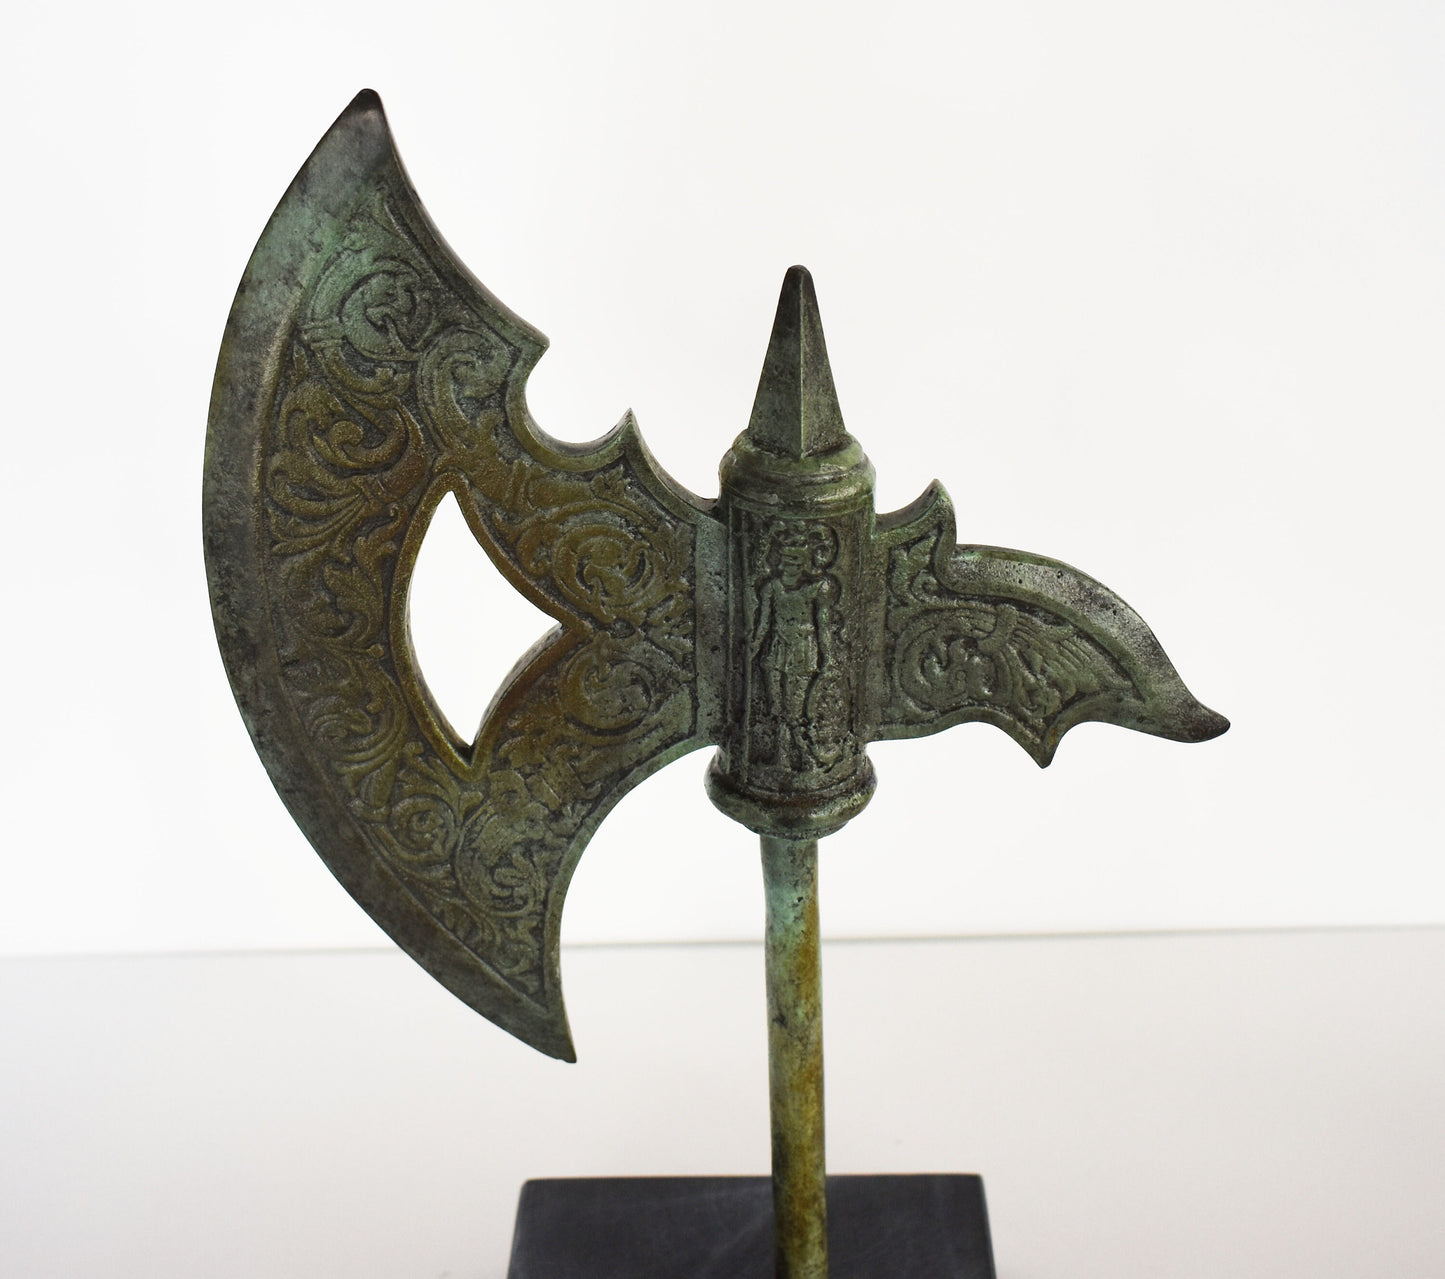 Labrys or Double Axe - Half - Minoan Art, Knossos Palace - Marble Base - Museum Replica - Pure Bronze Sculpture